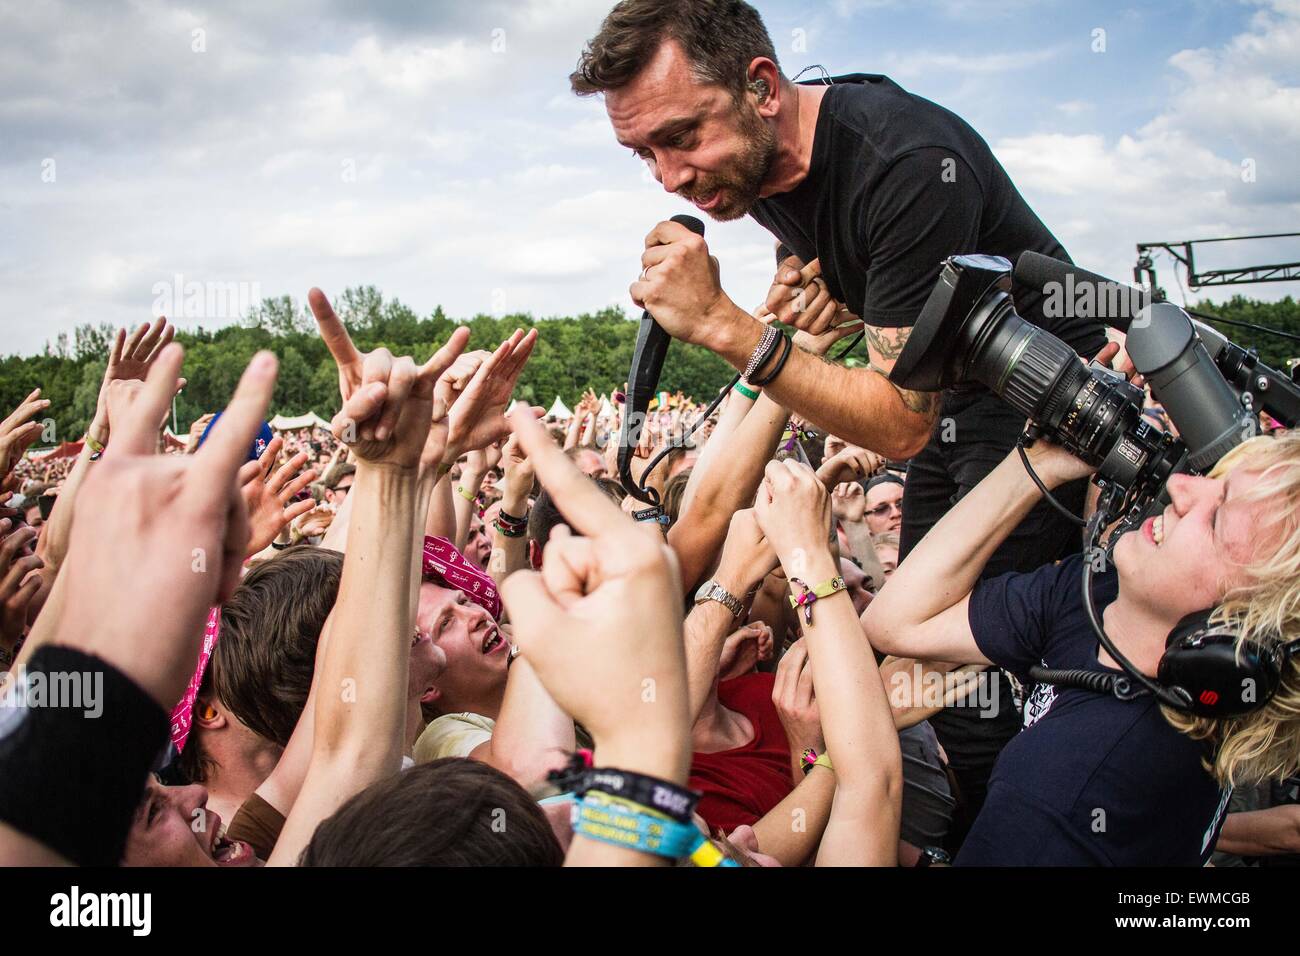 Rise Against perform live at Pinkpop Festival 2015 in Landgraaf Netherlands © Roberto Finizio/Alamy Live News Stock Photo